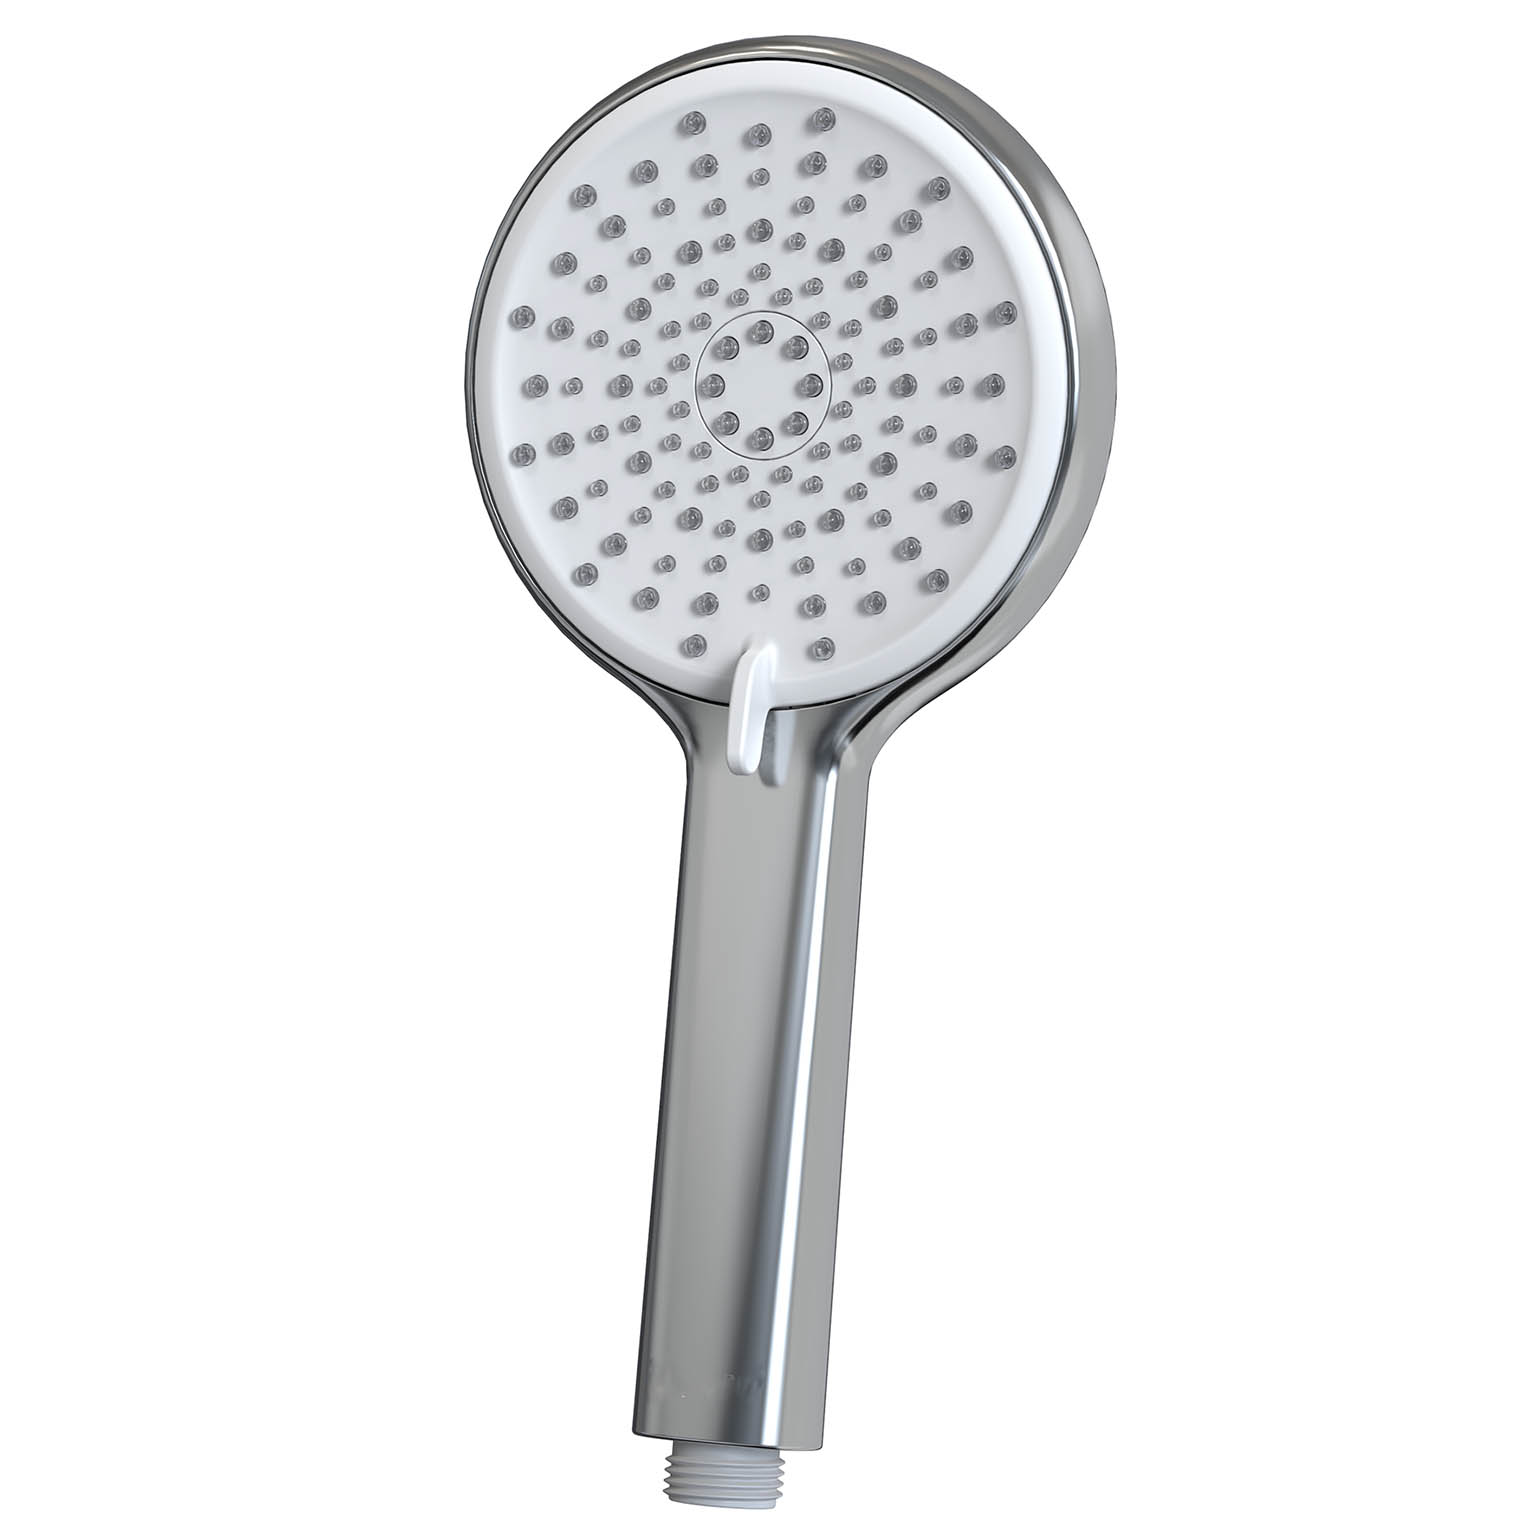 4 Functions ABS Chrome Round Square Handshower